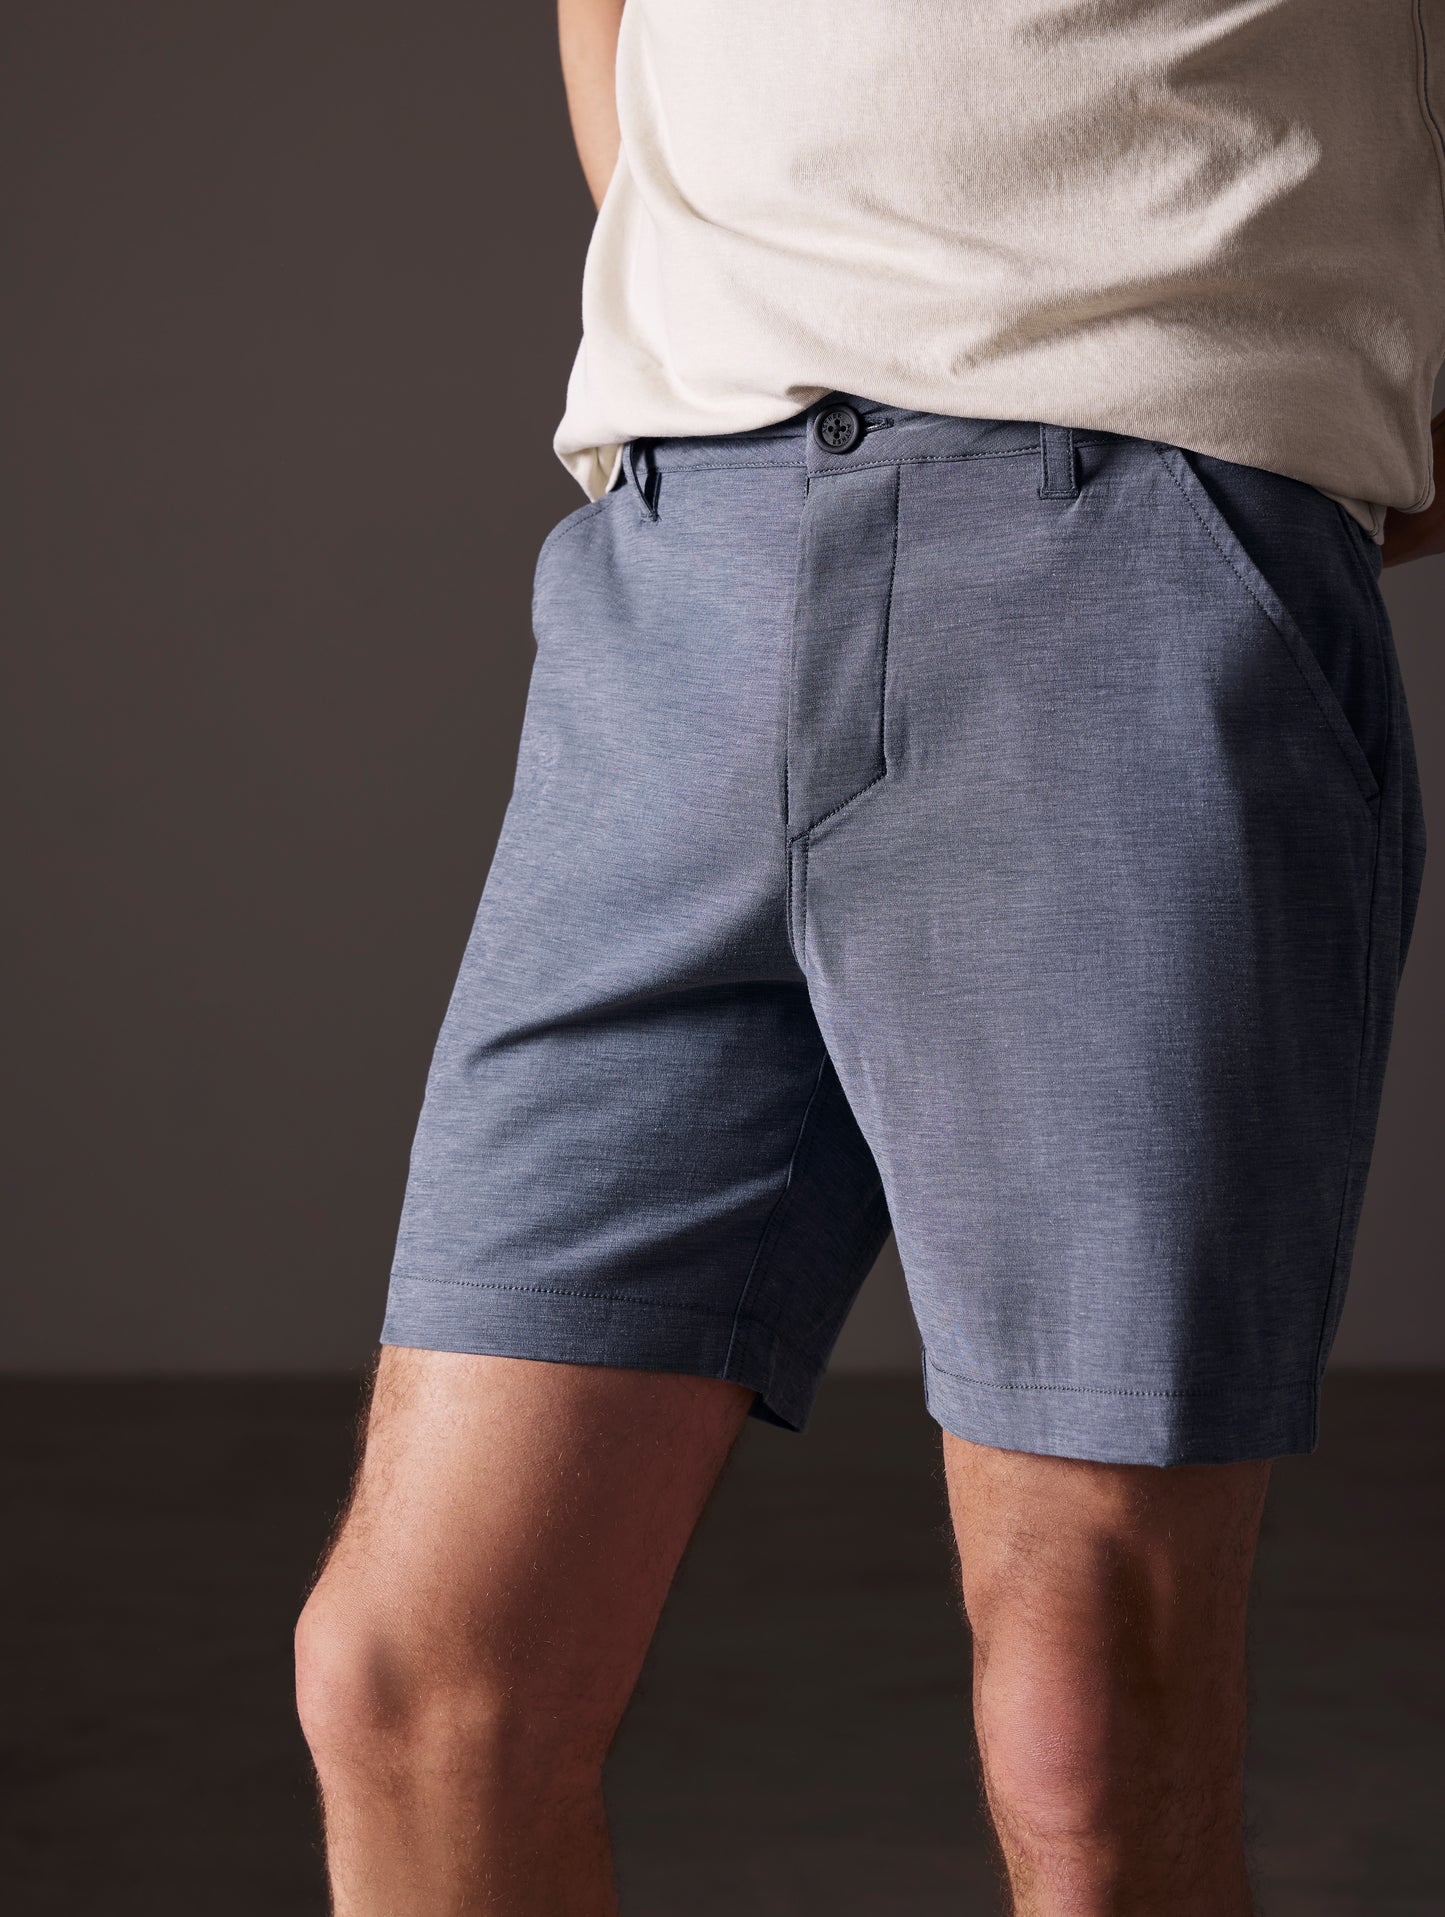 man wearing blue swim shorts from AETHER Apparel